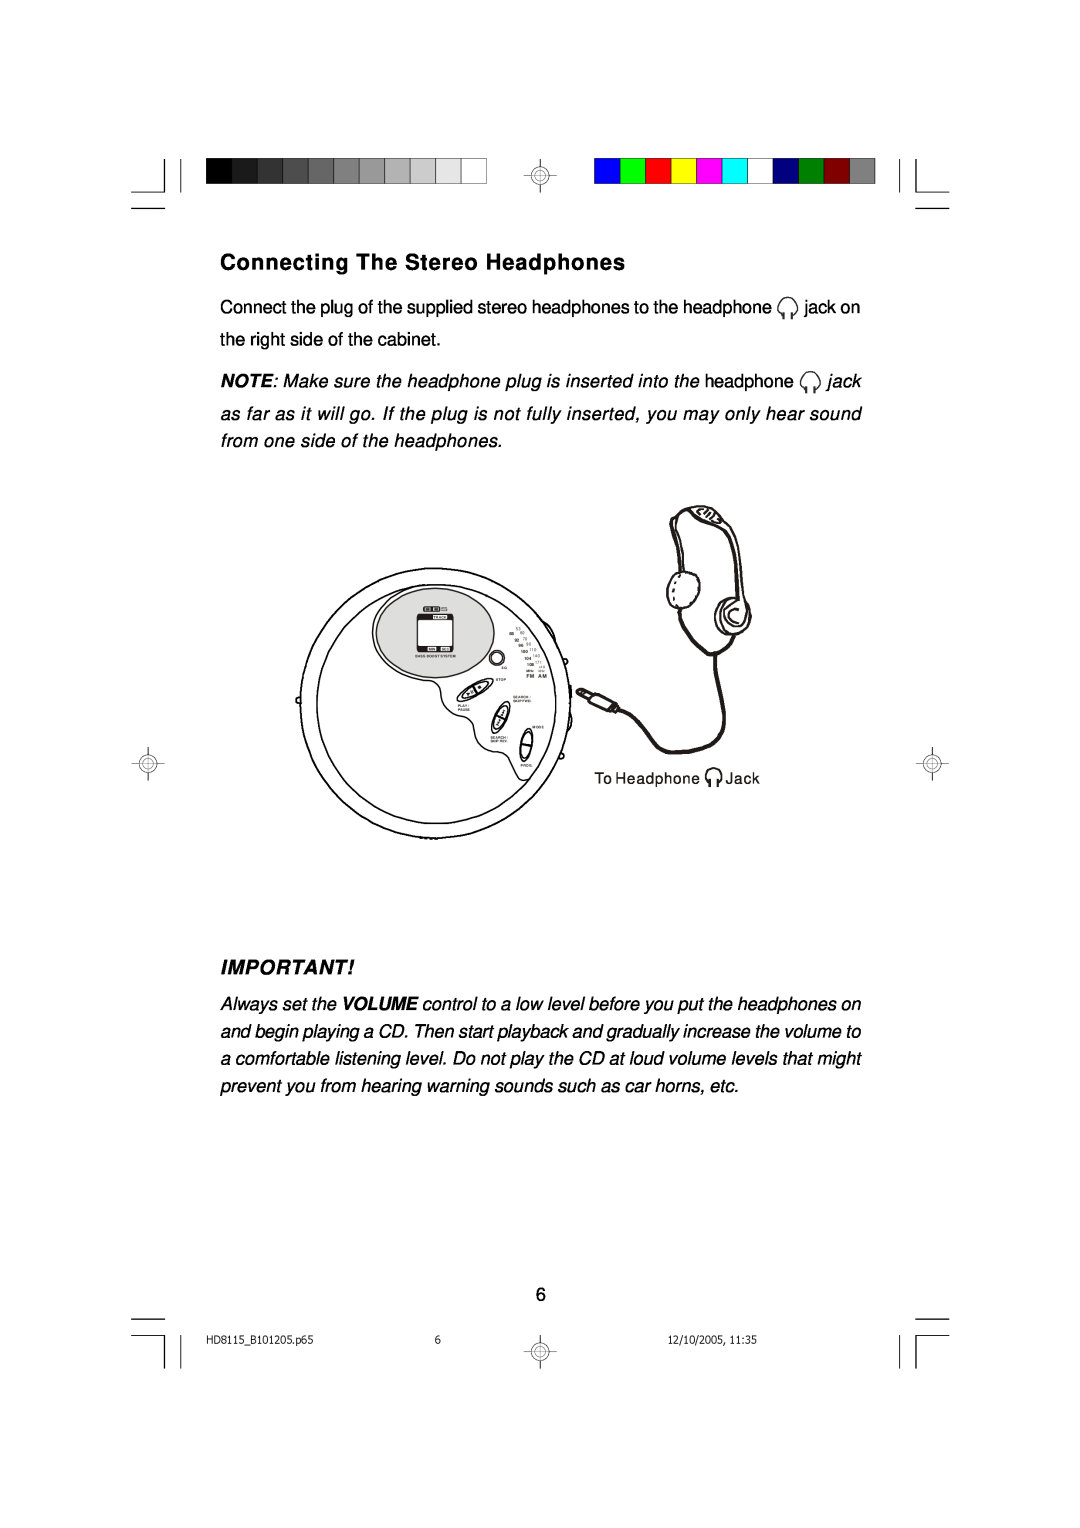 Emerson HD8115 owner manual Connecting The Stereo Headphones, the right side of the cabinet 